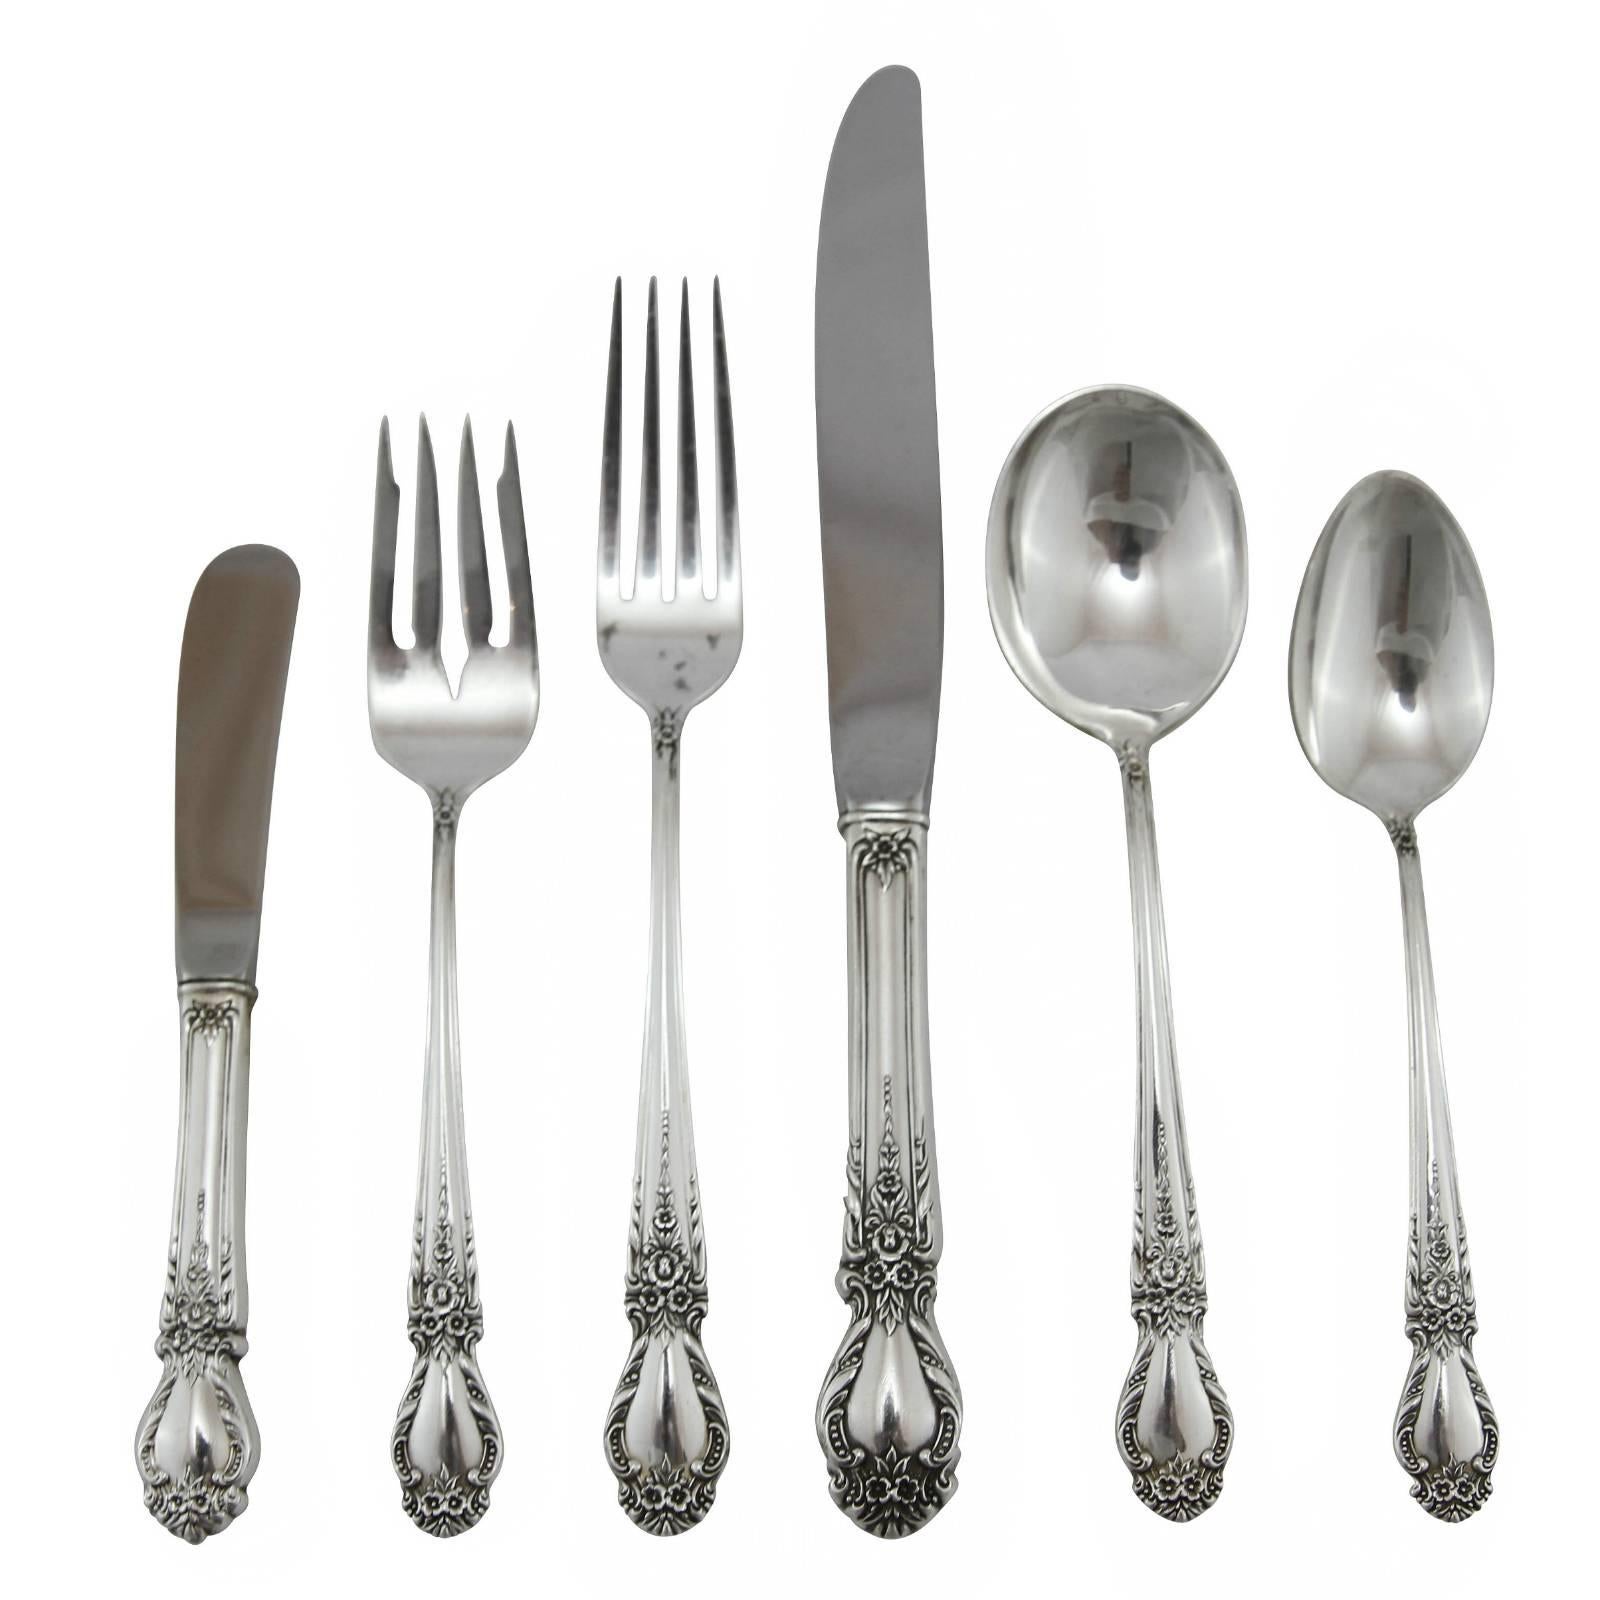 “Brocade” Sterling Silver Flatware Set by the International Silver Company For Sale